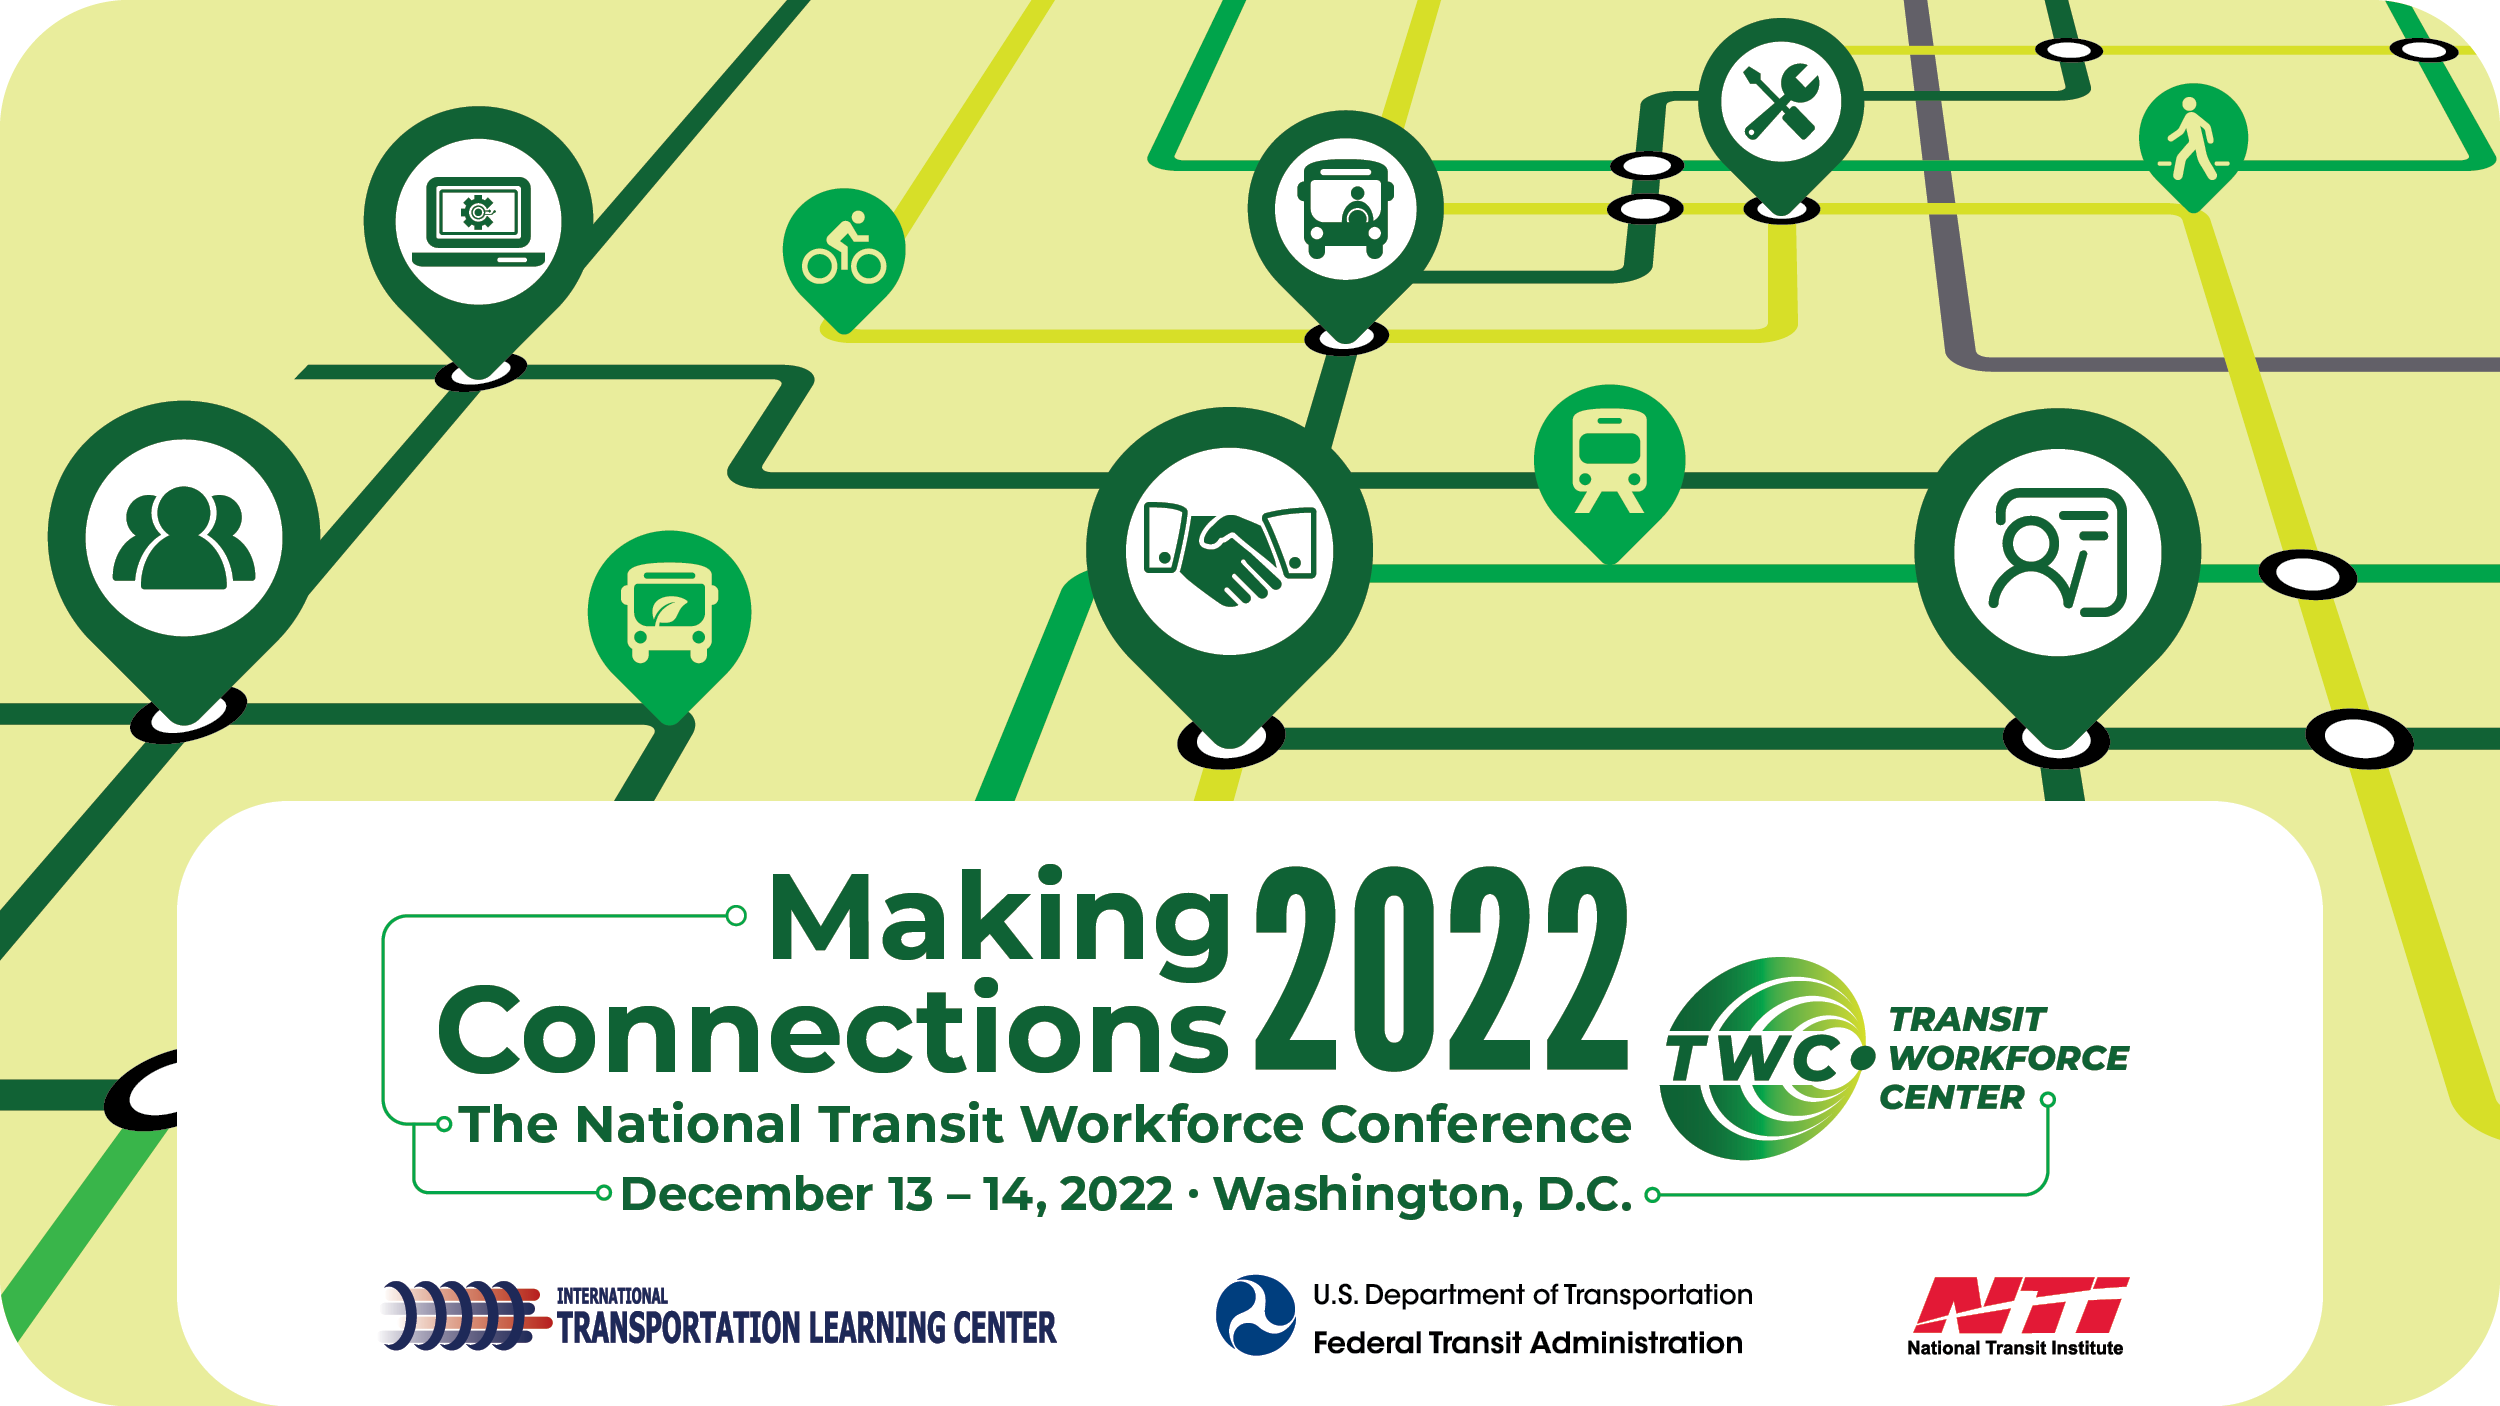 Federal Funding Available for Making Connections 2022 Conference!